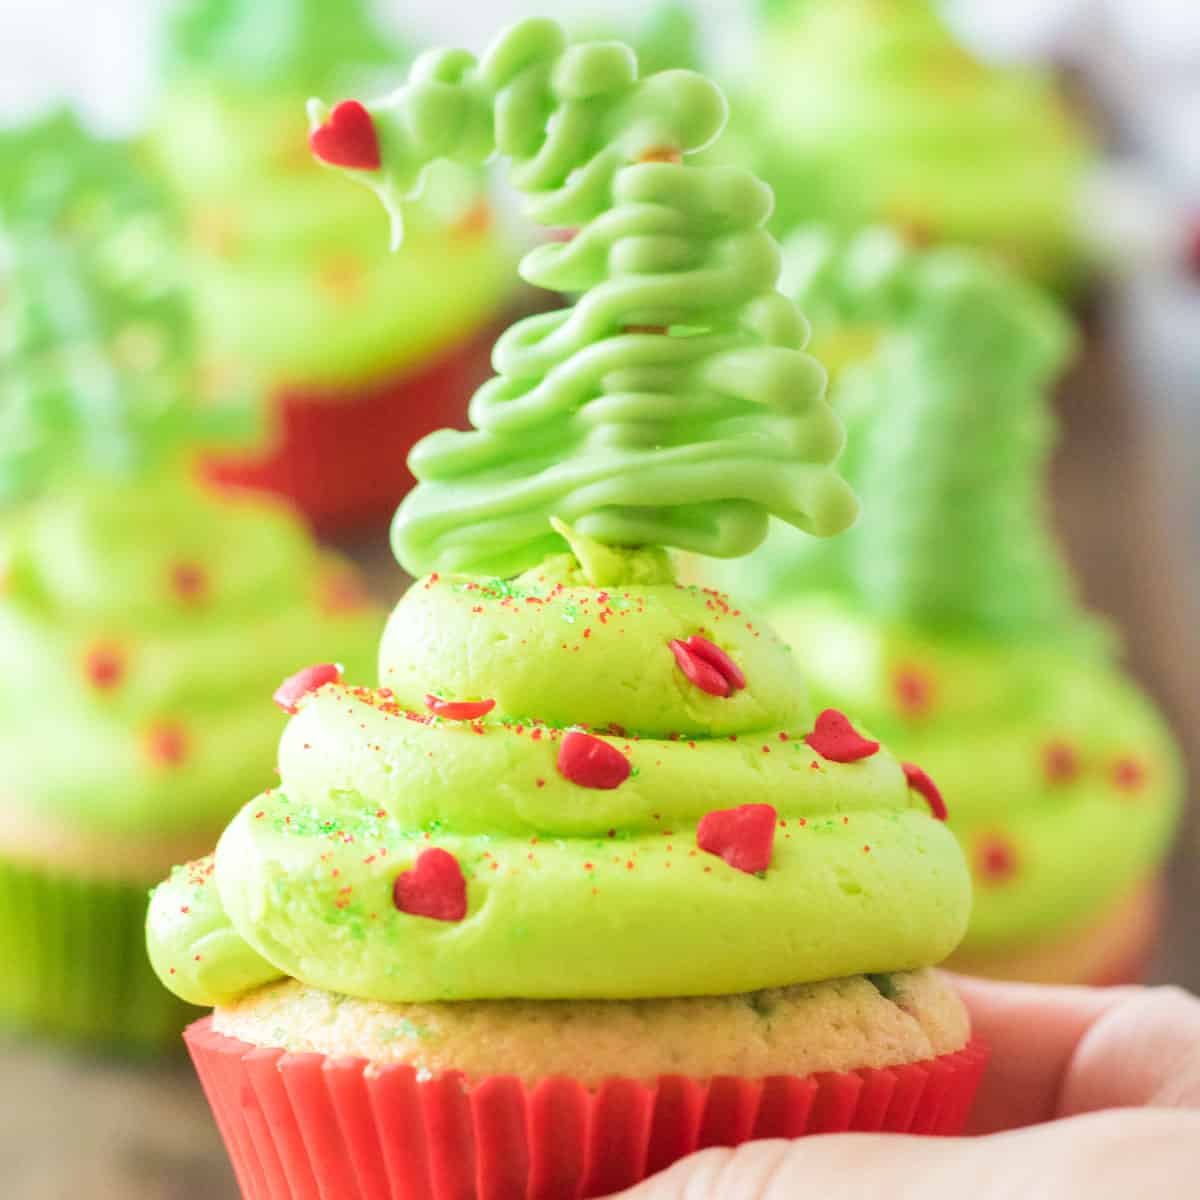 Grinch Cupcakes